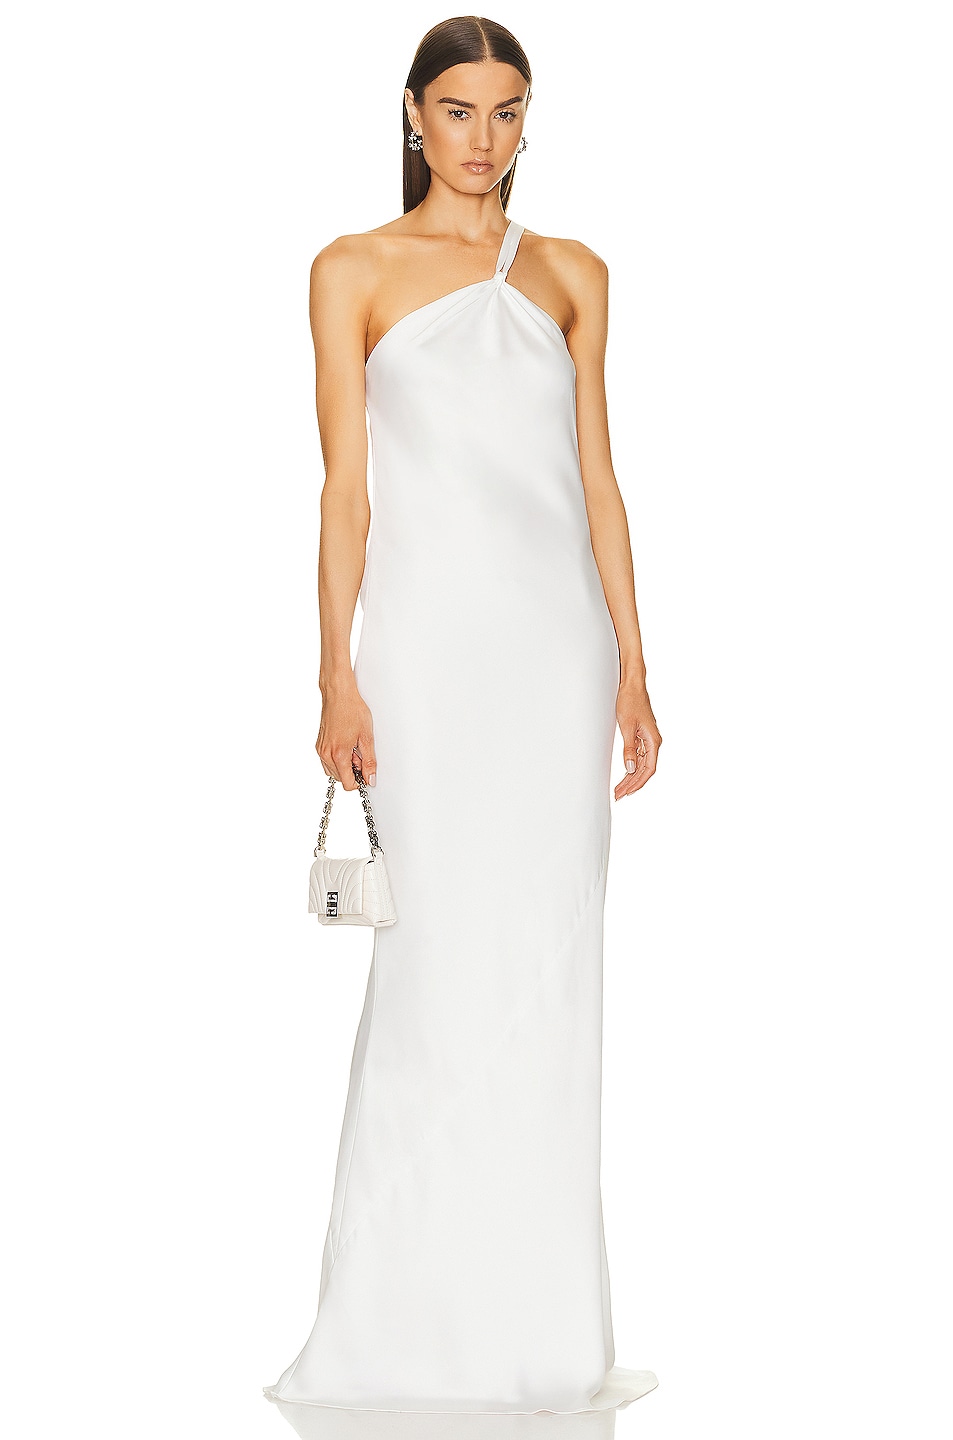 Norma Kamali One Shoulder Bias Gown in Snow White | FWRD